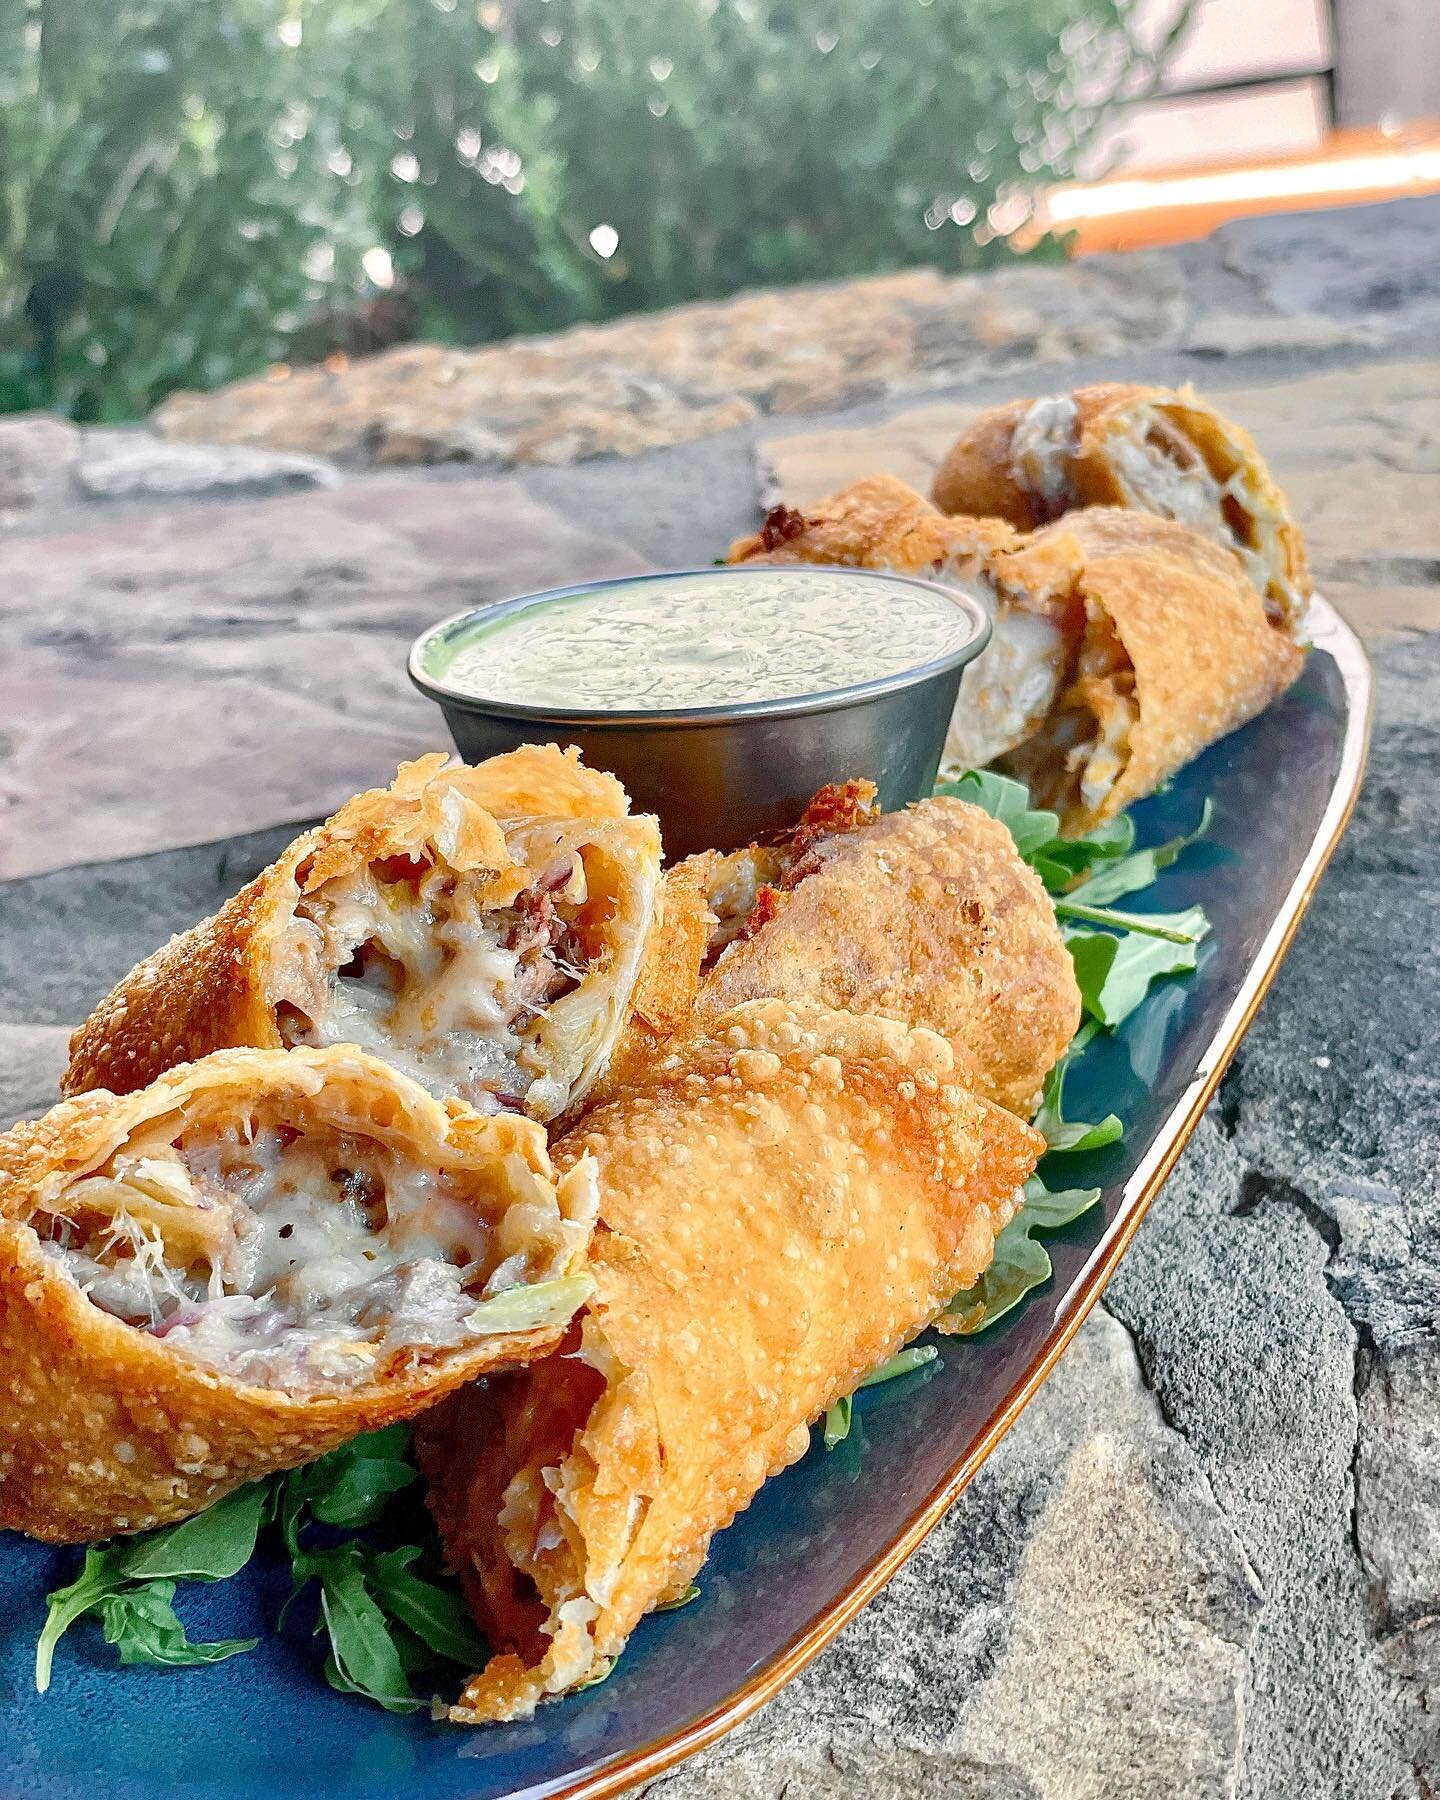 We have a BRAND NEW Lunch Menu rolling out today! Come grab a bite of some of our new favorites! 😋

&bull; Cuban Eggroll 
&bull; Fried Chicken Sandwich
&bull; Blackened Grouper Sandwich 
&bull; French Dip Sliders 
&bull; Vegetable Panini 
&bull; Chi